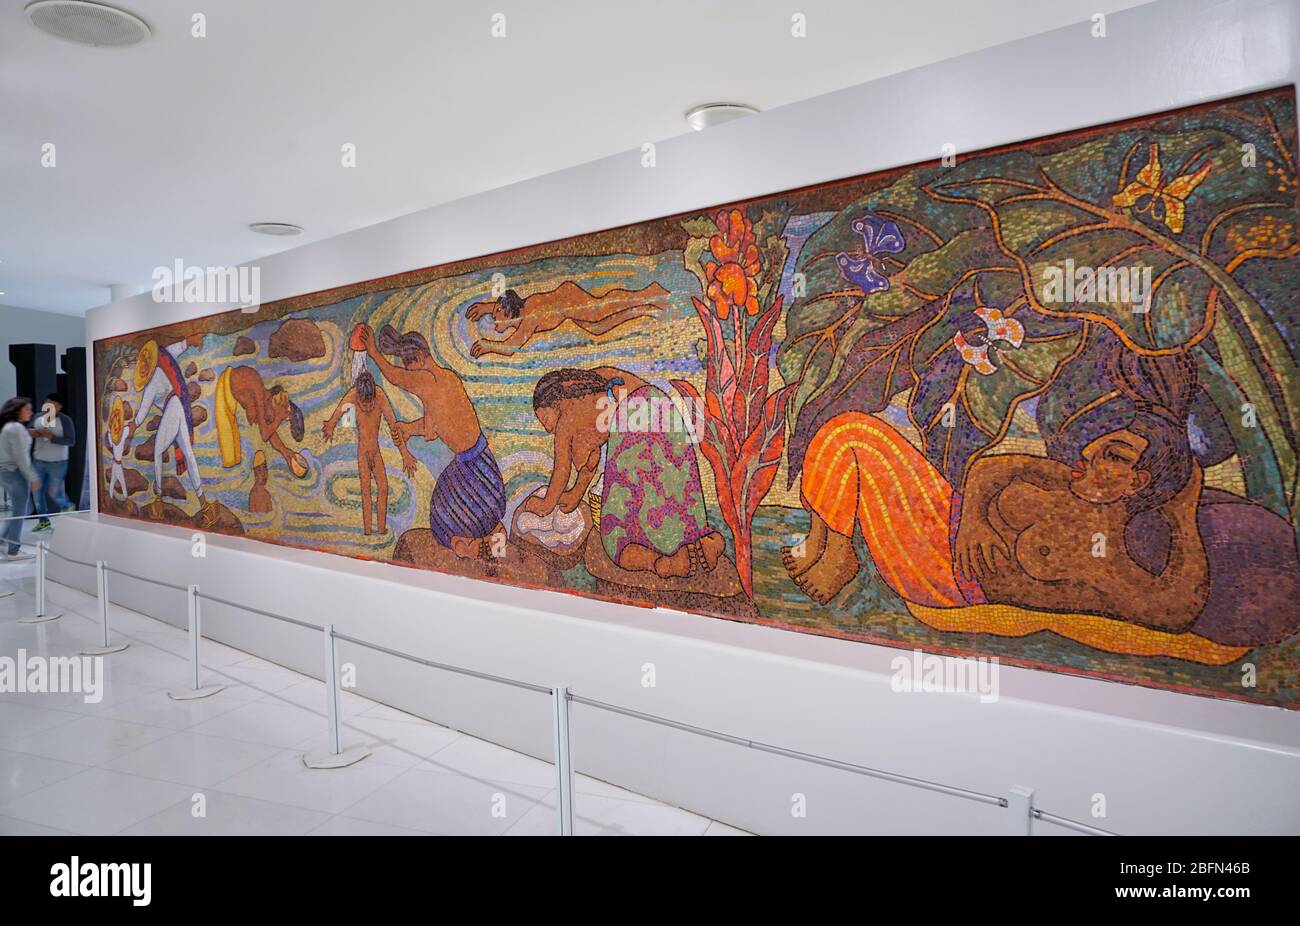 Diego Rivera mosaic, Bath in the River' or 'Juchitan River' or 'Bath of Tehuantepec', in the Soumaya Museum in Mexico City, Mexico. Stock Photo